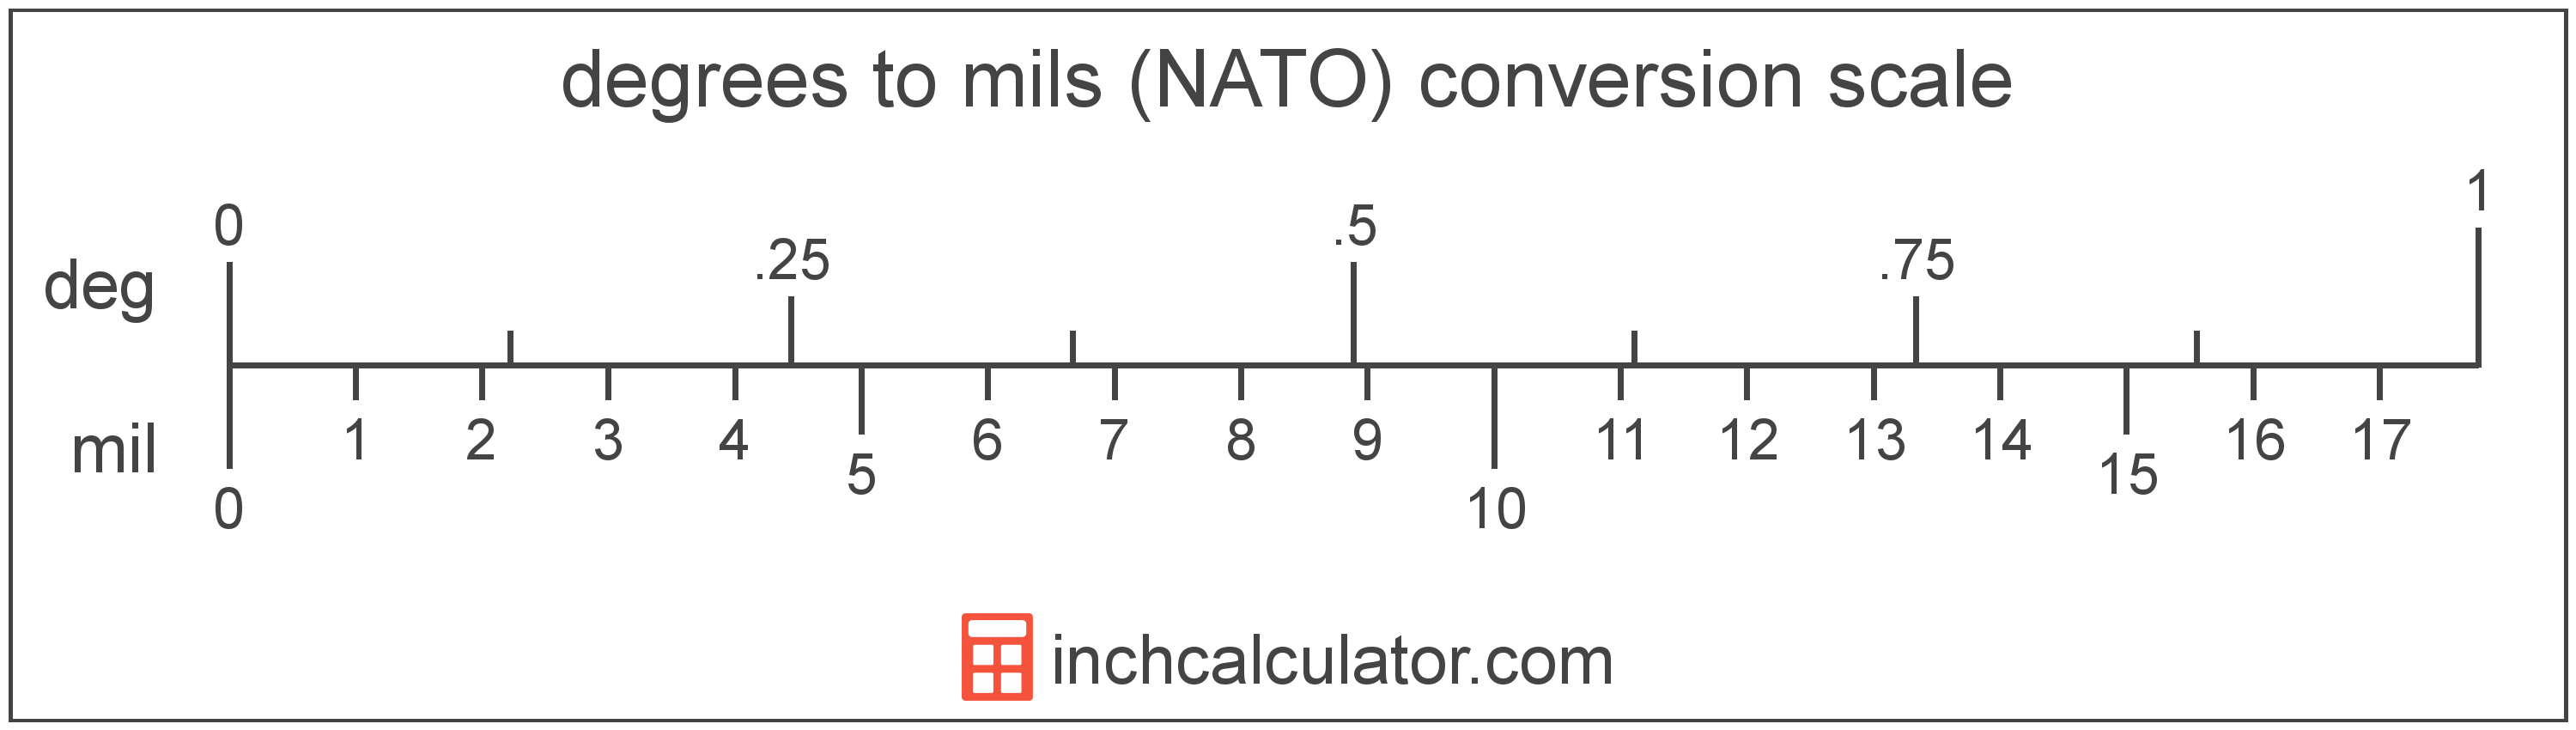 conversion scale showing mils and equivalent degrees angle values